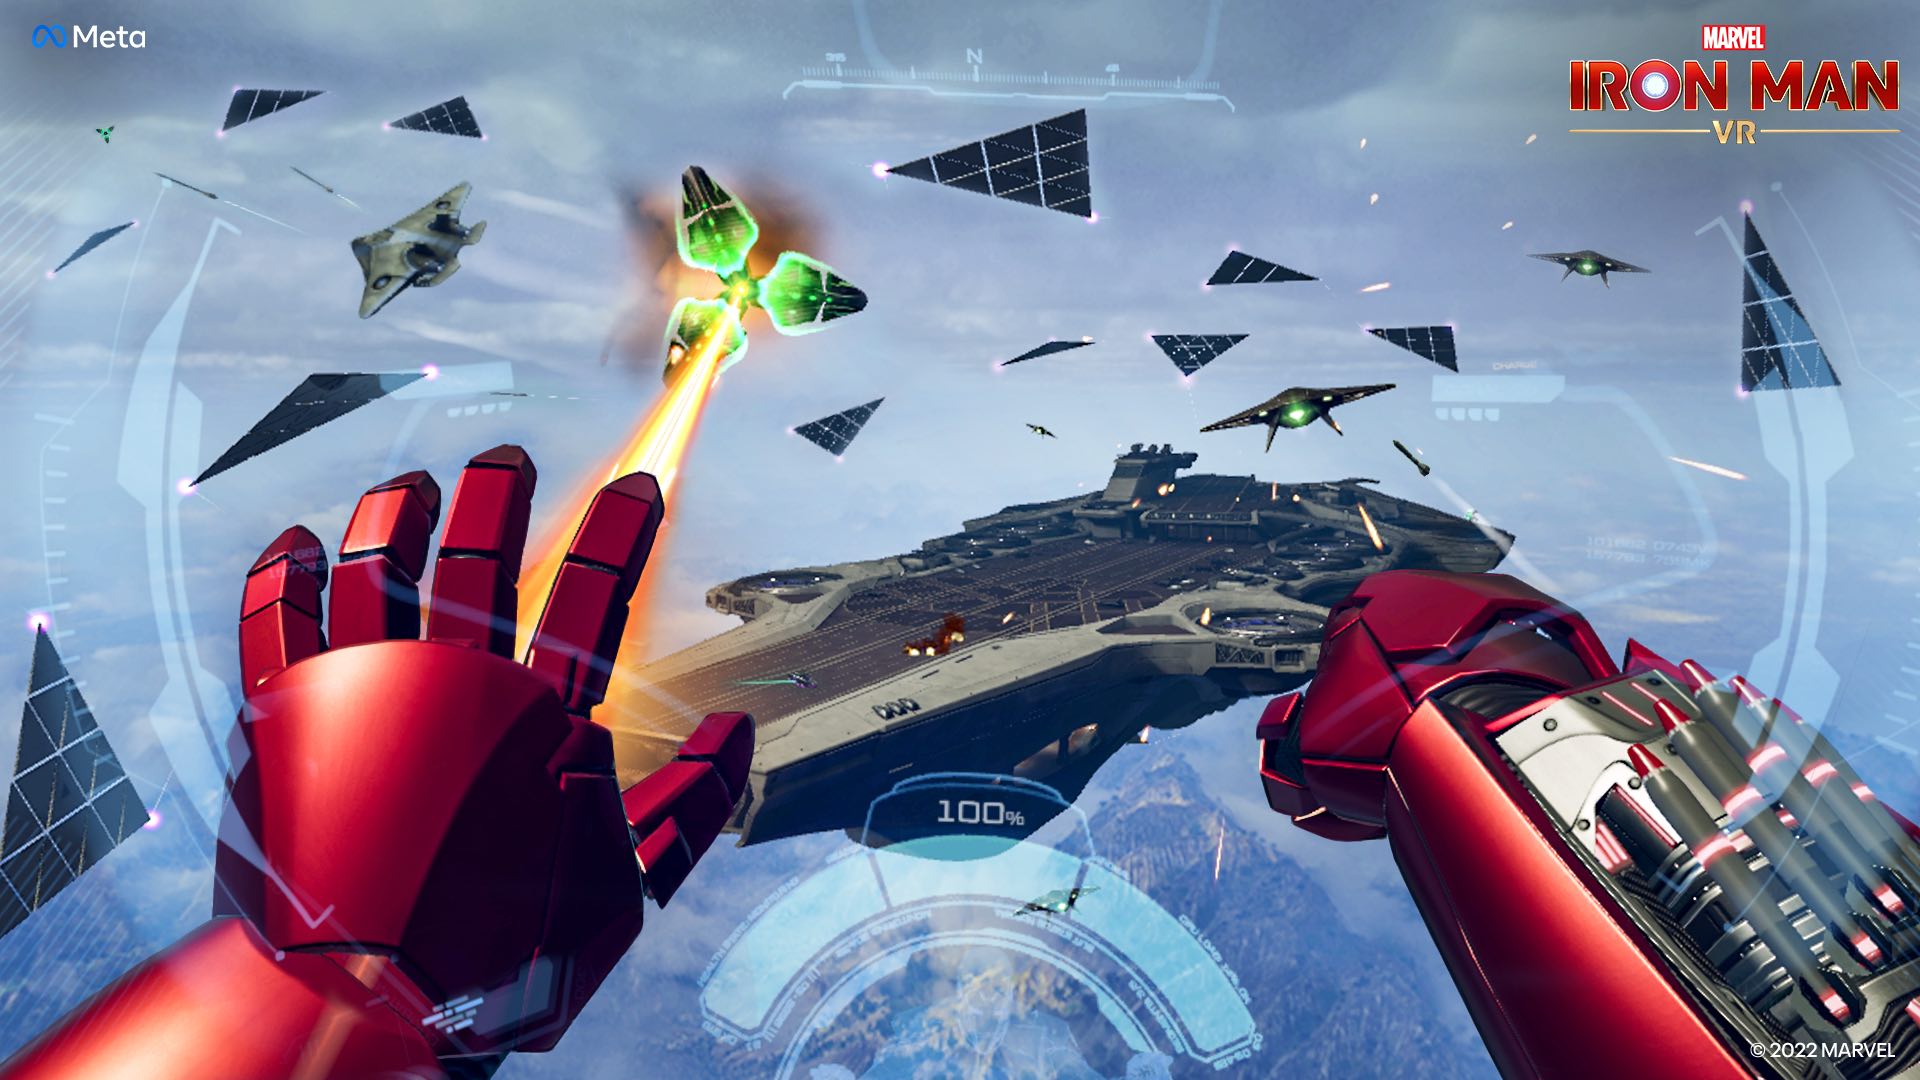 Marvel Iron Man VR Meta Quest 2 screenshot featuring Iron Man flying above a helicarrier